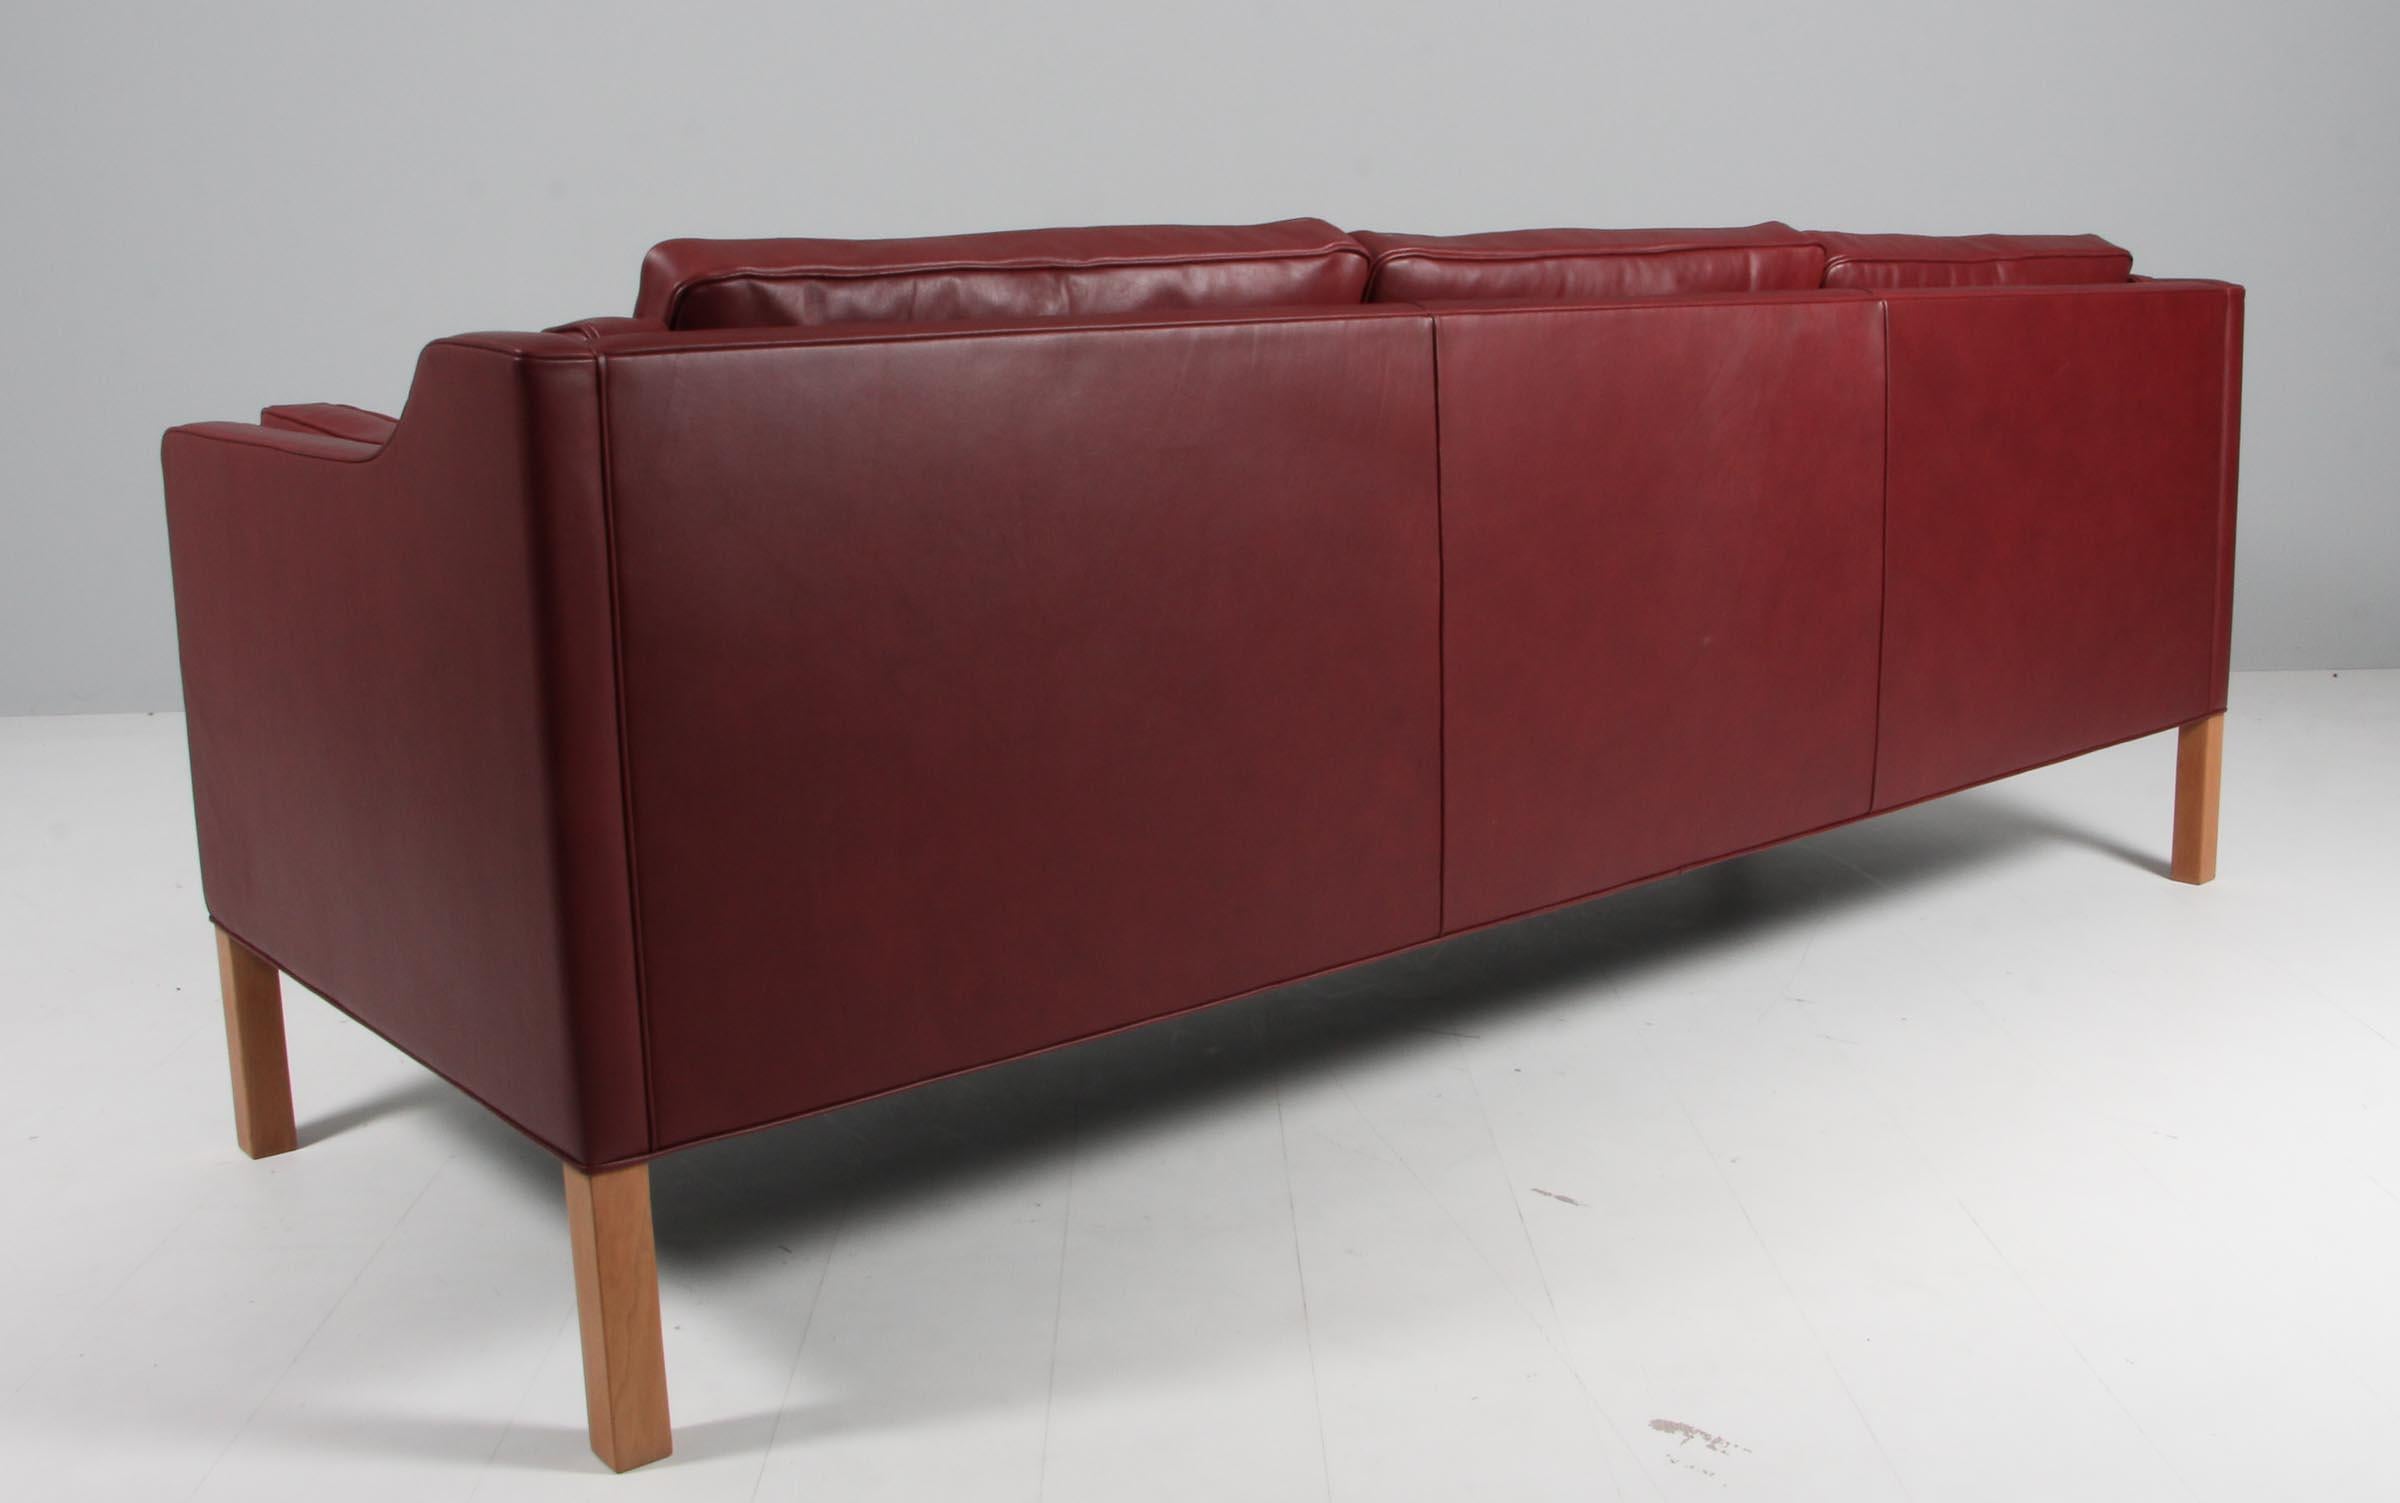 Børge Mogensen three-seat sofa new upholstered with Indian red elegance aniline leather.

Legs of teak.

Model 2213, made by Fredericia Furniture.